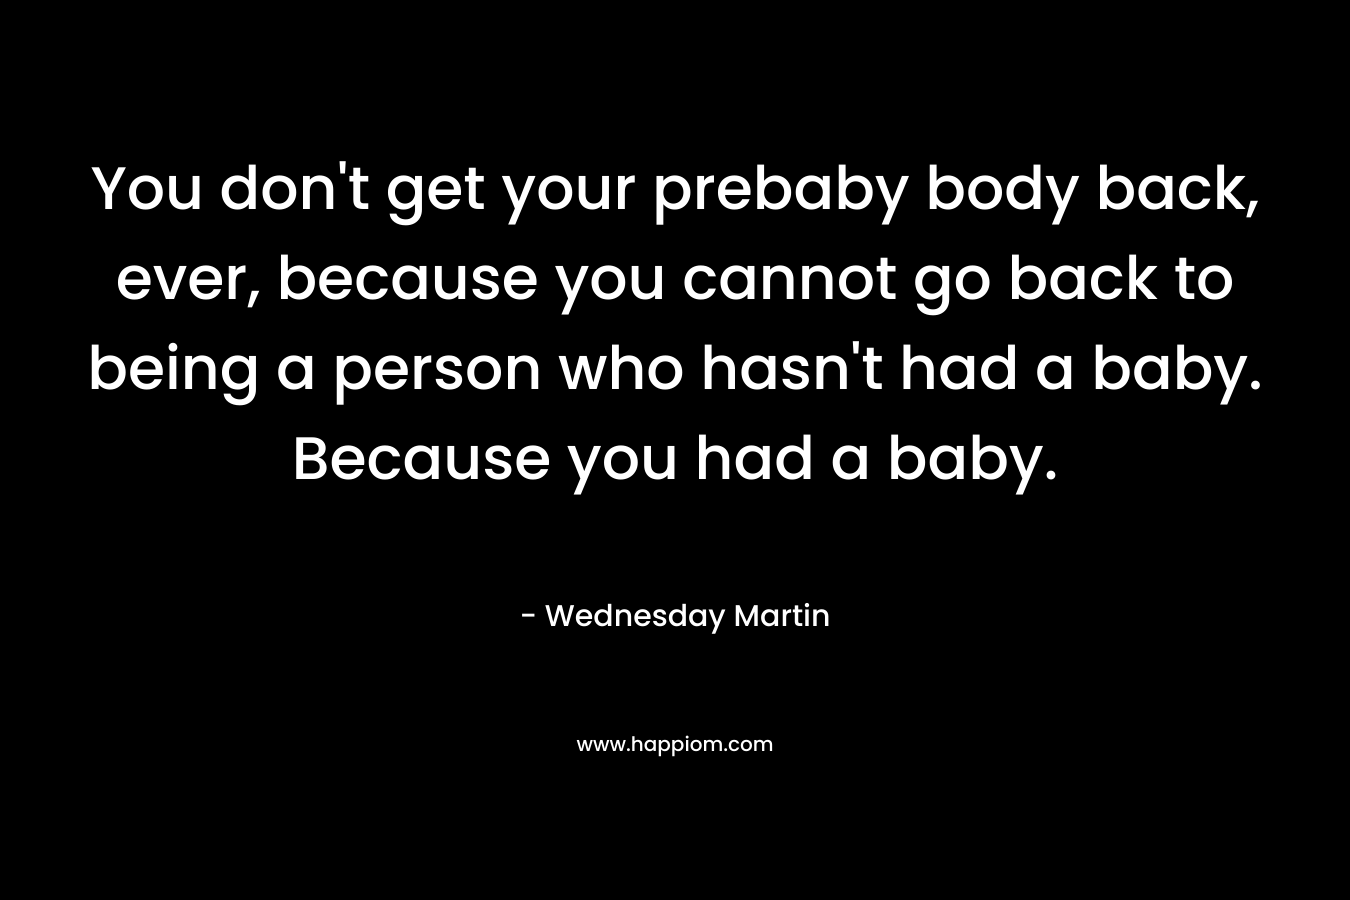 You don't get your prebaby body back, ever, because you cannot go back to being a person who hasn't had a baby. Because you had a baby.